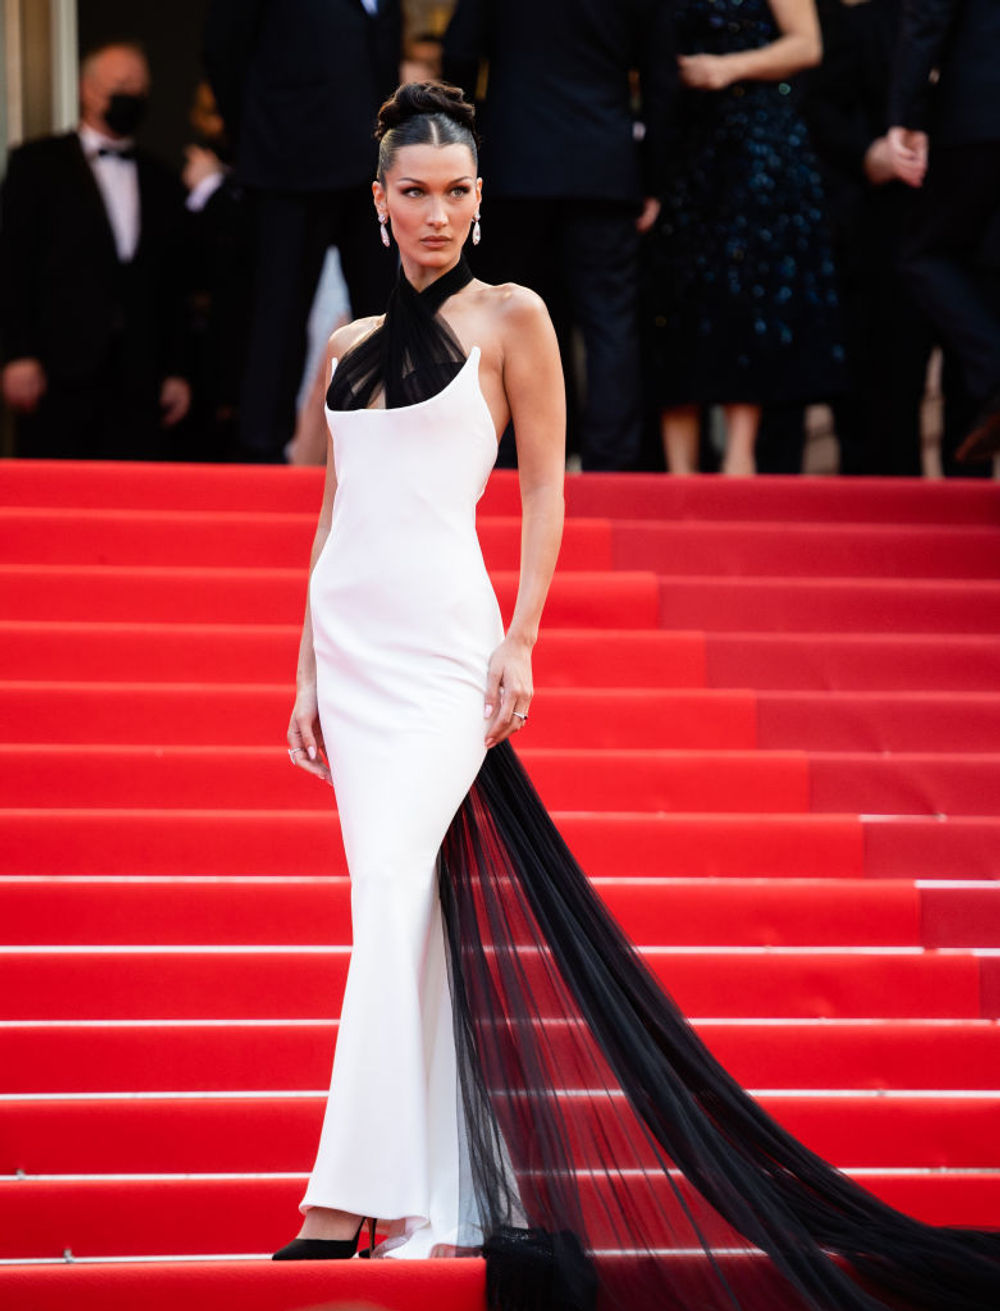 All the glamorous red carpet looks from the 74th Cannes Film Festival